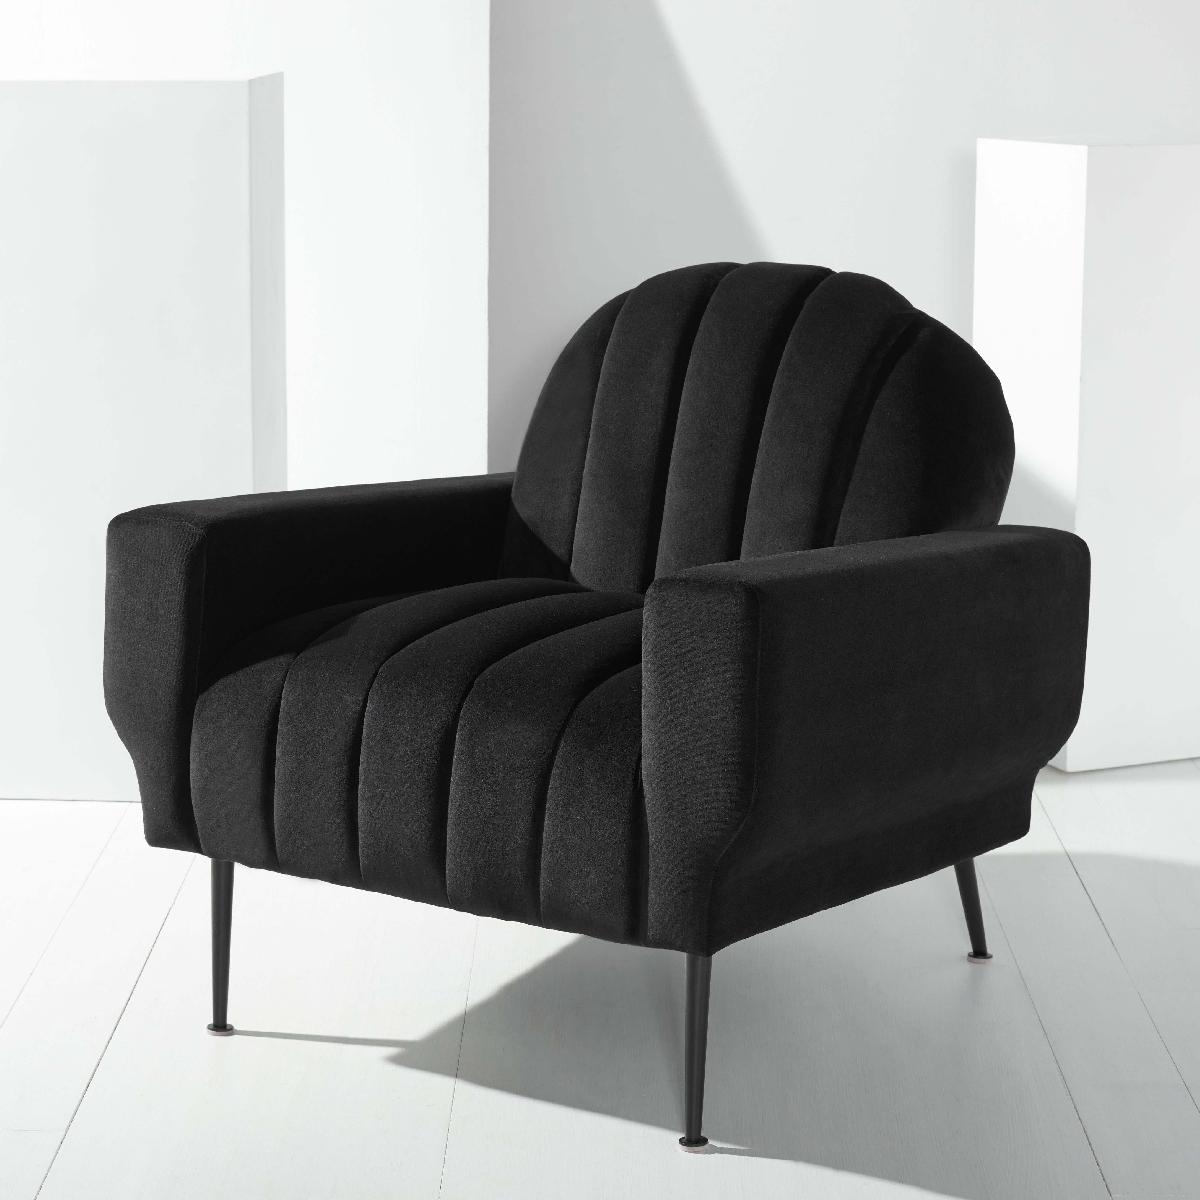 Safavieh Couture Josh Channel Tufted Accent Chair - Black